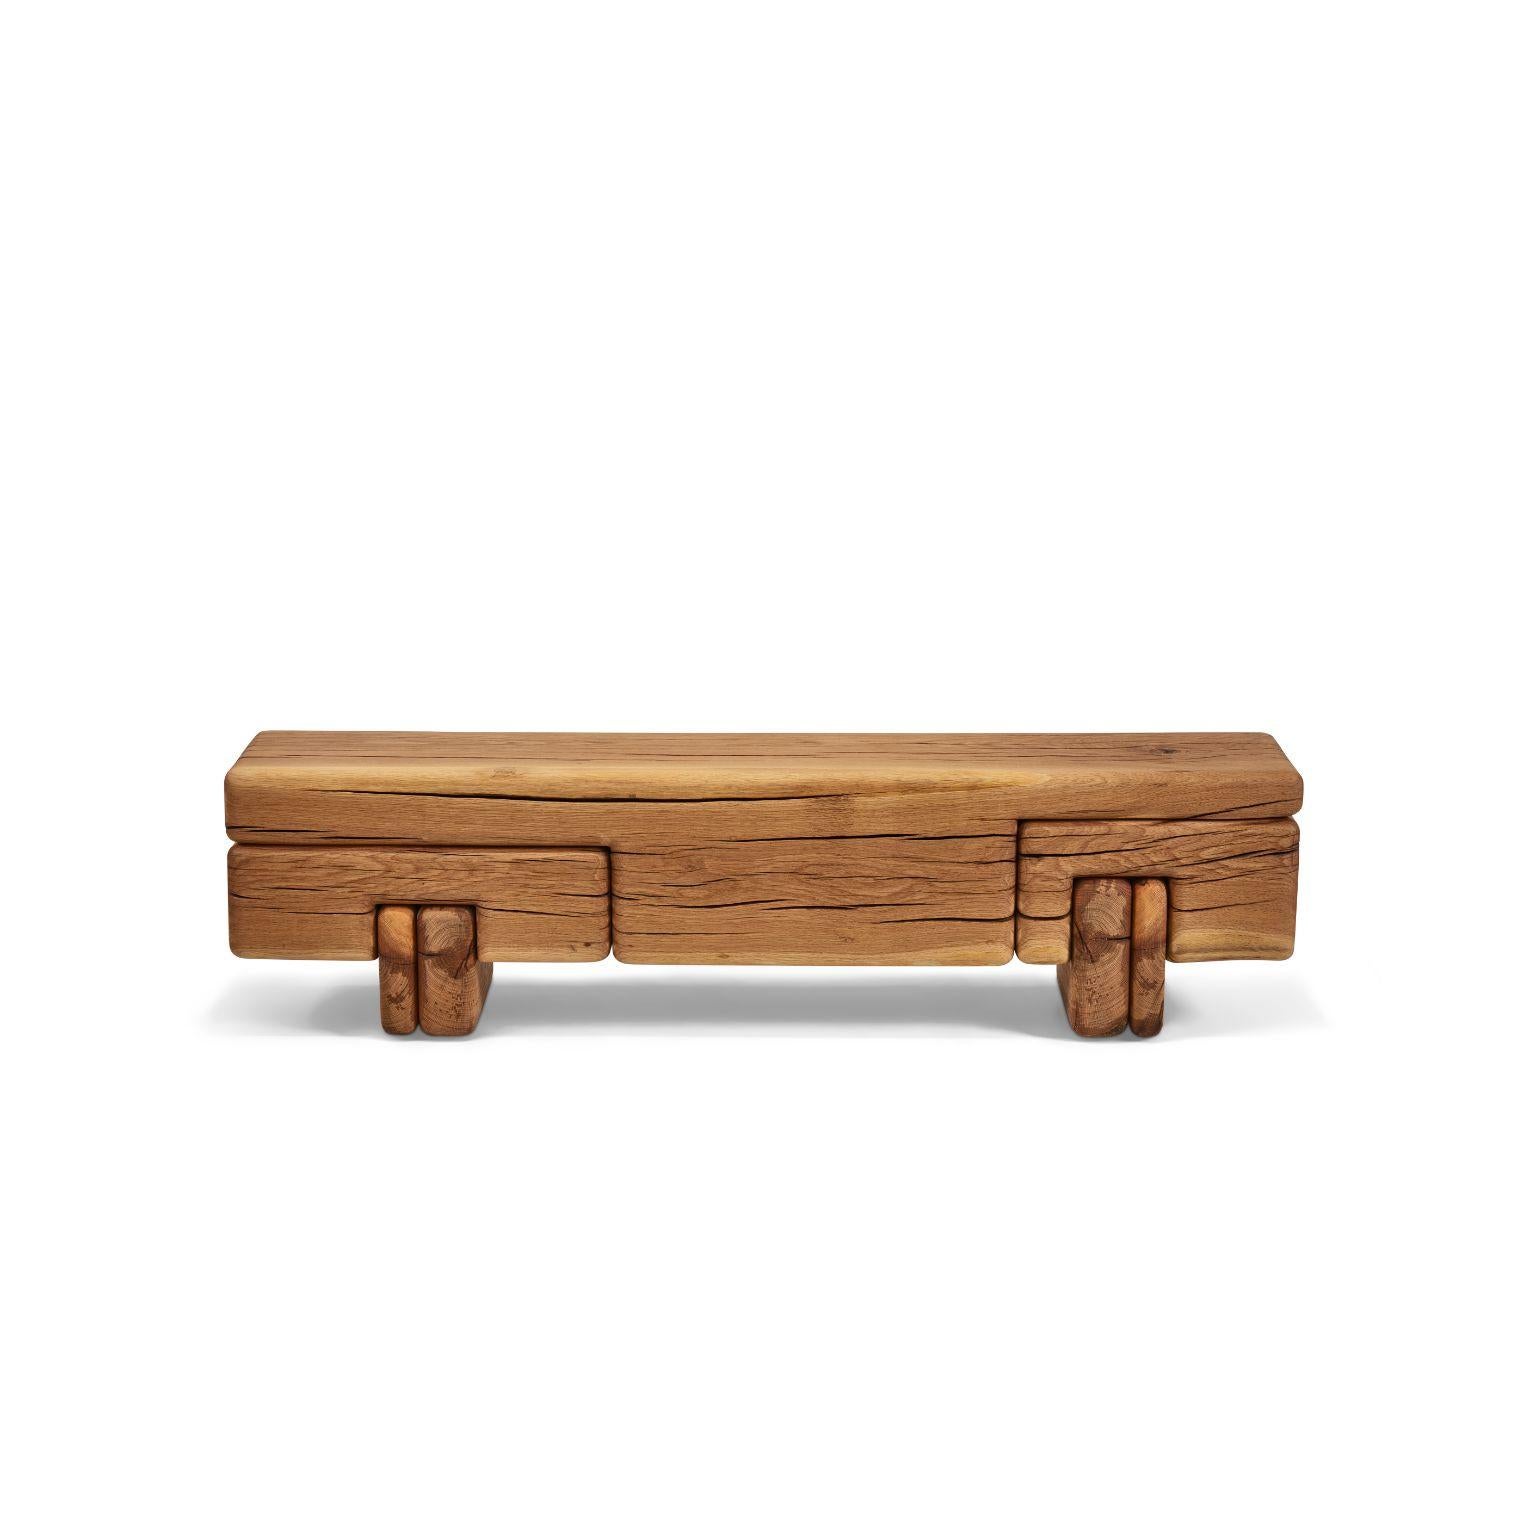 Turkish Oak Monoblock bench by Contemporary Ecowood
Dimensions: W 150 x D 29 x H 39 cm.
Materials: Turkish Oak
Finishing: Monocoat Wood Oil

Contemporary Ecowood’s story began in a craft workshop in 2009. Our wood passion made us focus on fallen